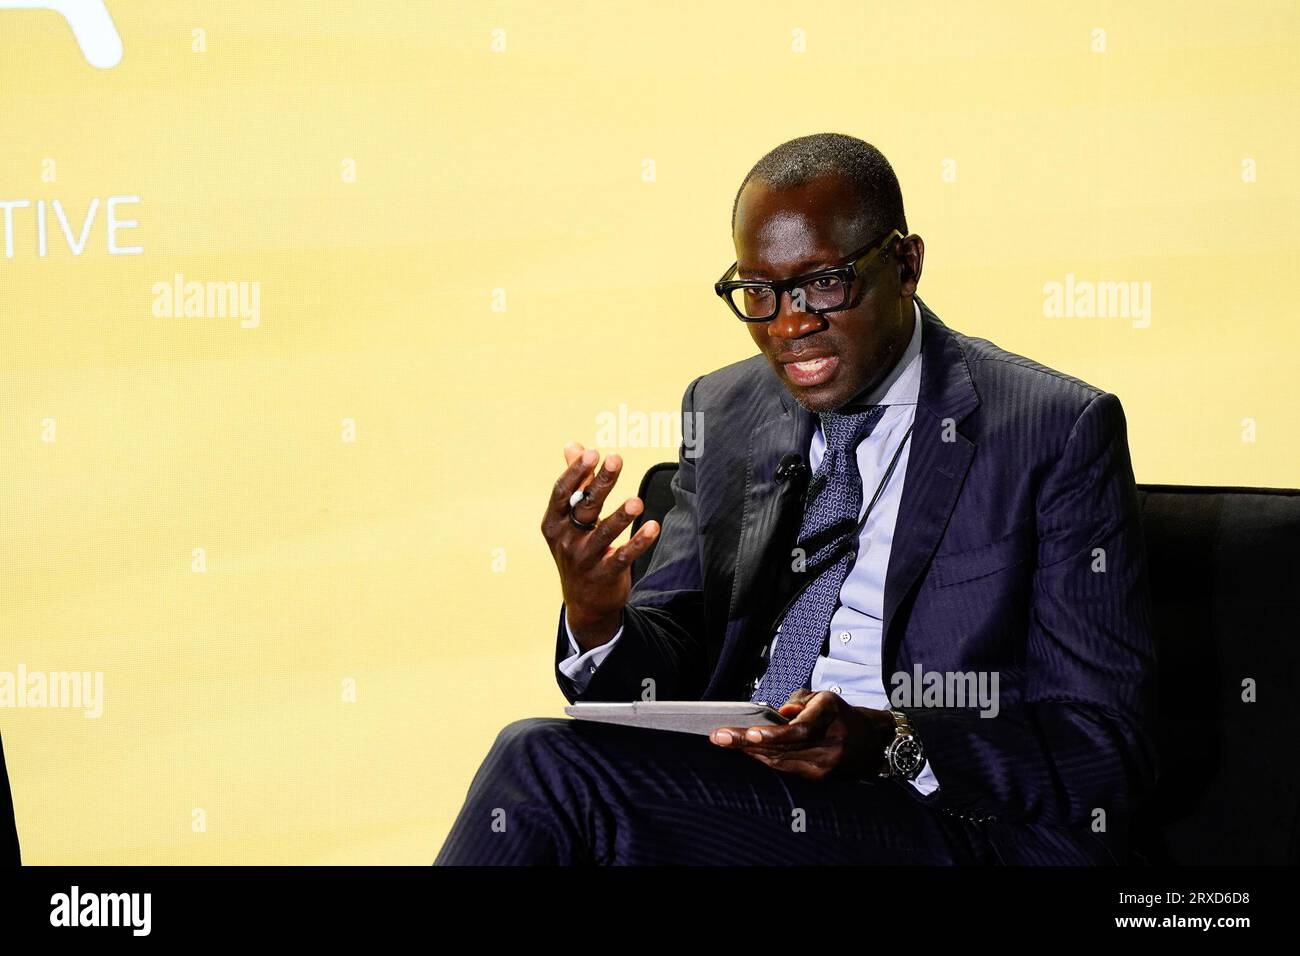 New York, New York, USA  21-22  Sept 2023 Dr. Acha Leke during the 2023 UNSTOPPABLE AFRICA Conference Presented By Global African Business Initiative, held at the Westin Grand Central in New York City, September 21-22 2023. Photo by Jennifer Graylock-Alamy Stock Photo